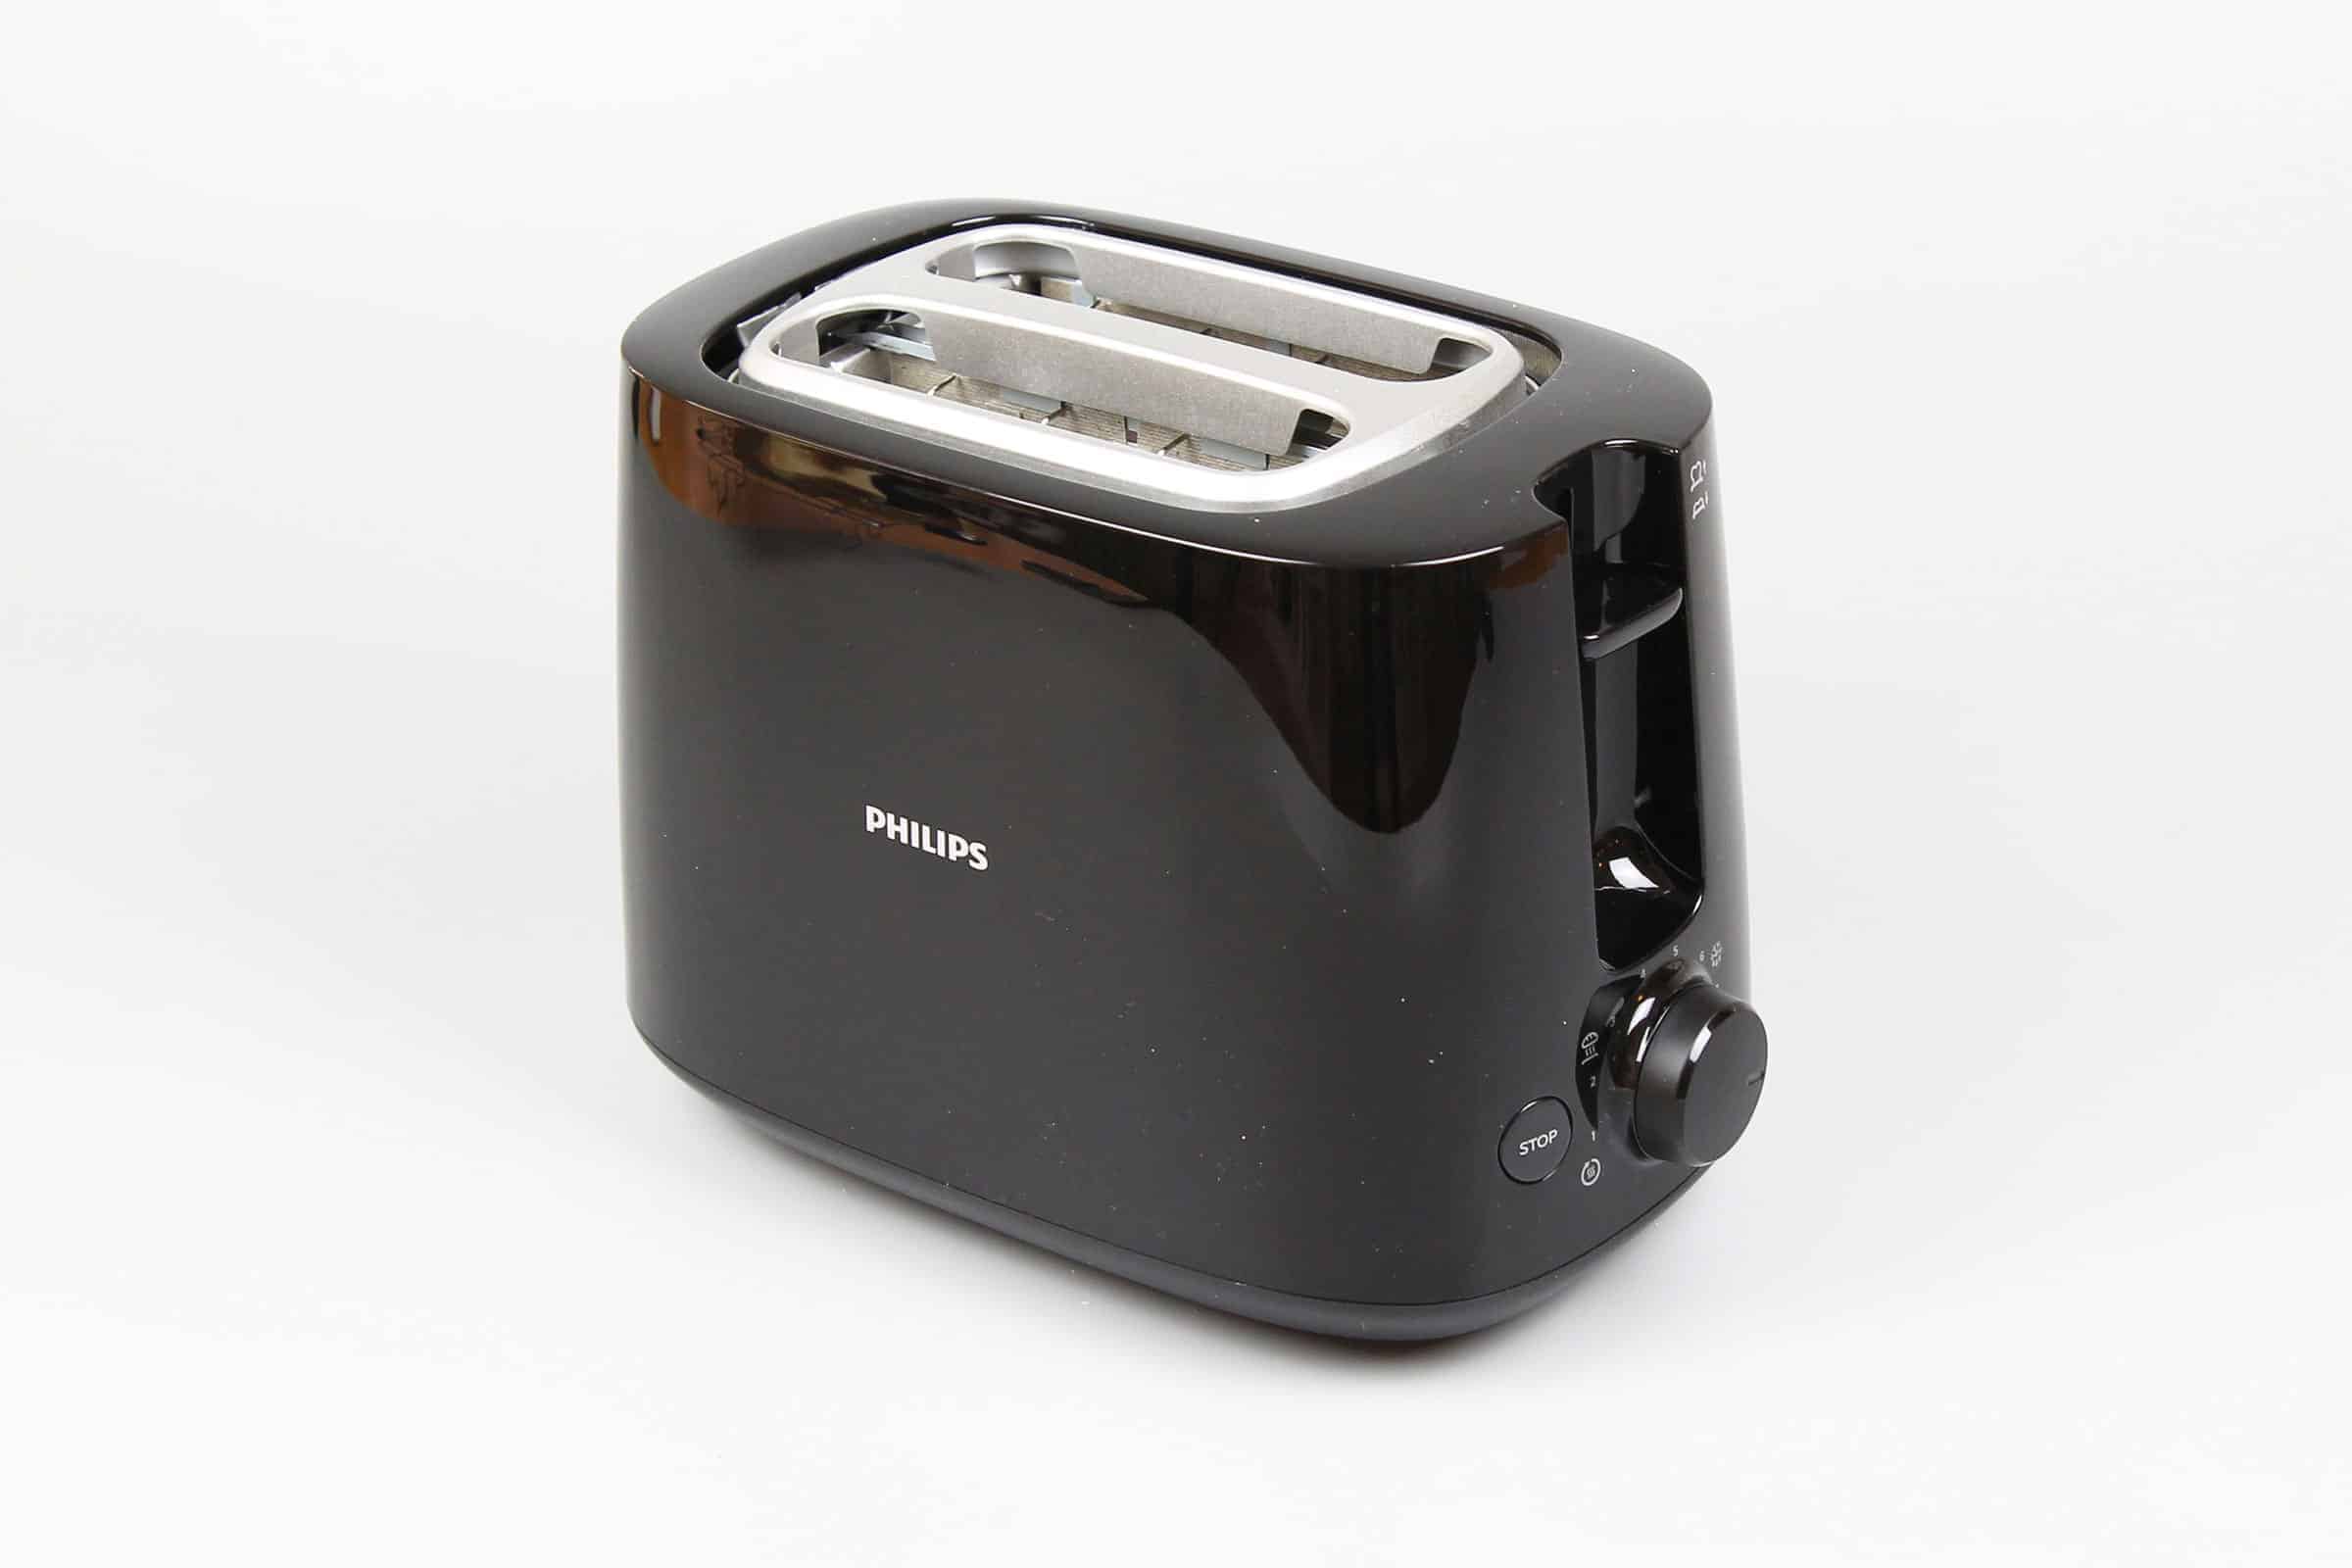 Toaster Test: Philips Hd2581 90